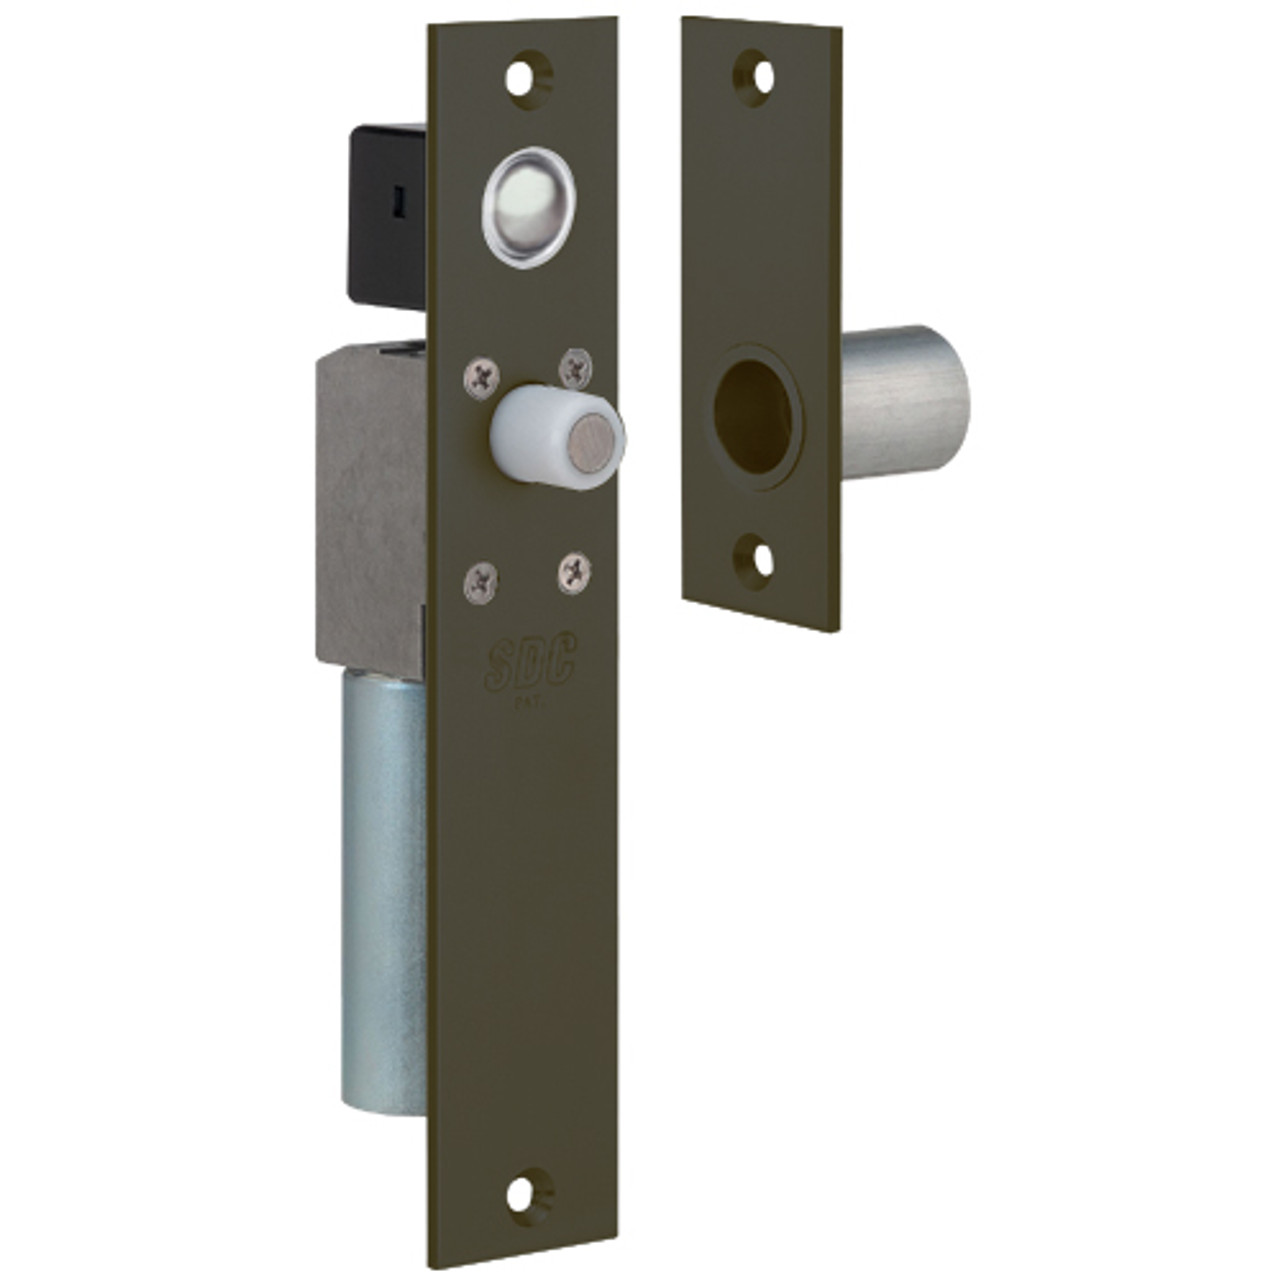 FS23MIHDB SDC Dual FailSafe Spacesaver Mortise Bolt Lock with Door Position and Bolt Position Sensor in Oil Rubbed Bronze